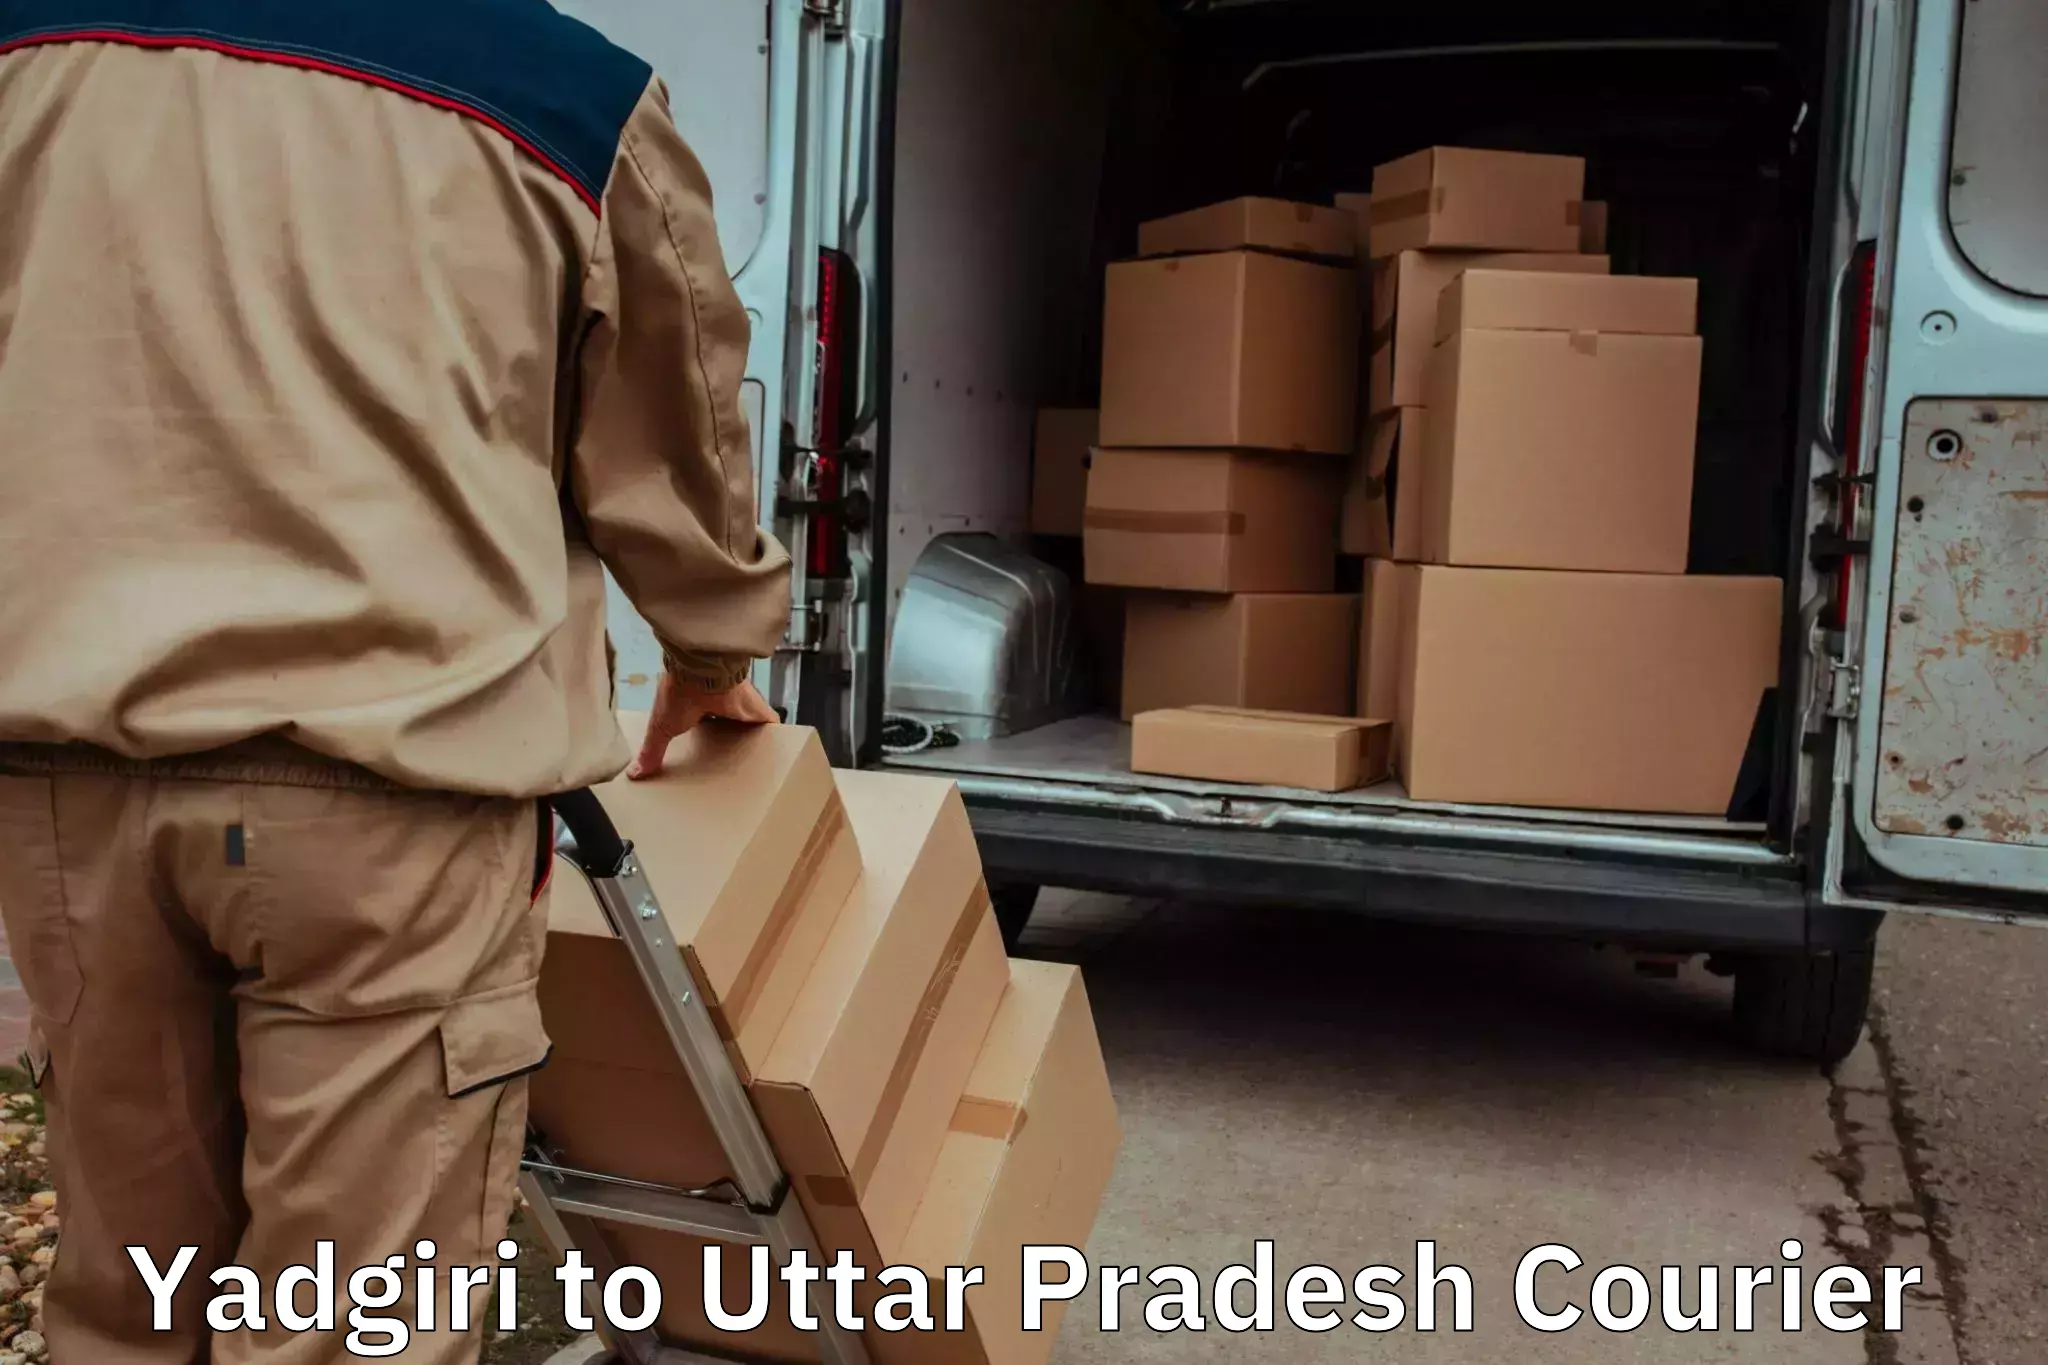 Quality relocation services Yadgiri to Bareilly